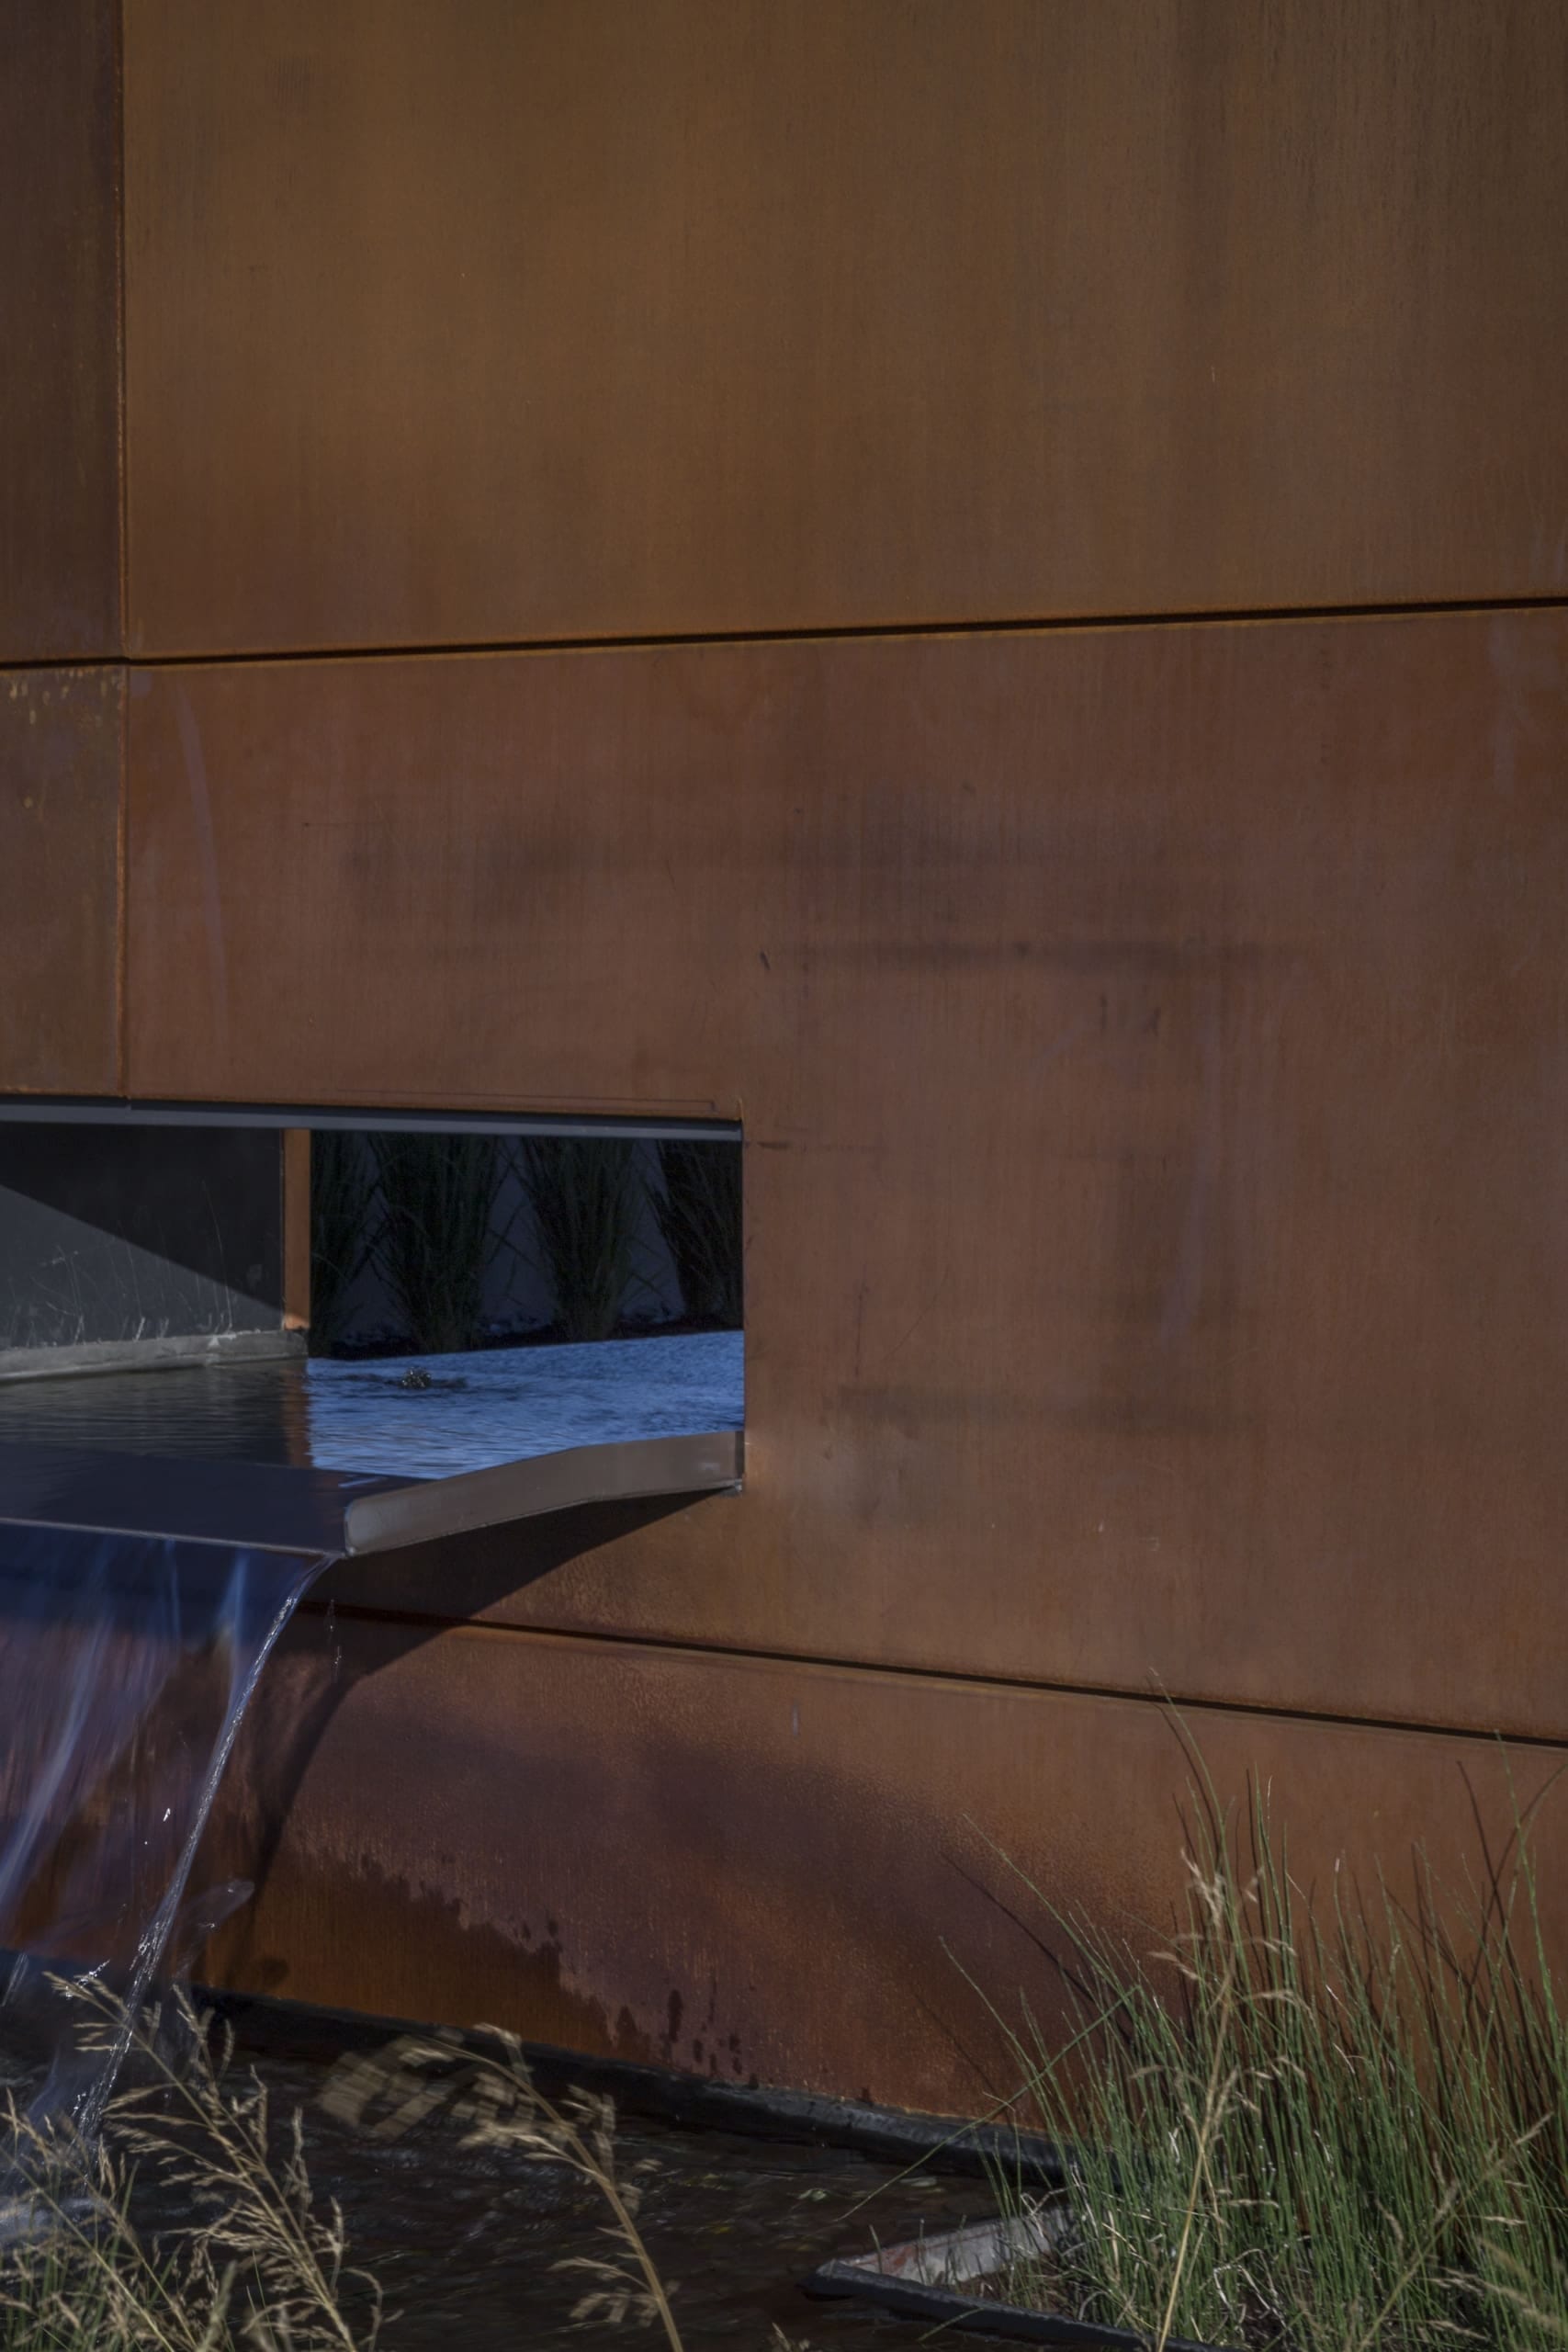 Preweathered weathering steel water feature at the Gulch Crossing development in Nashville, Tennessee.